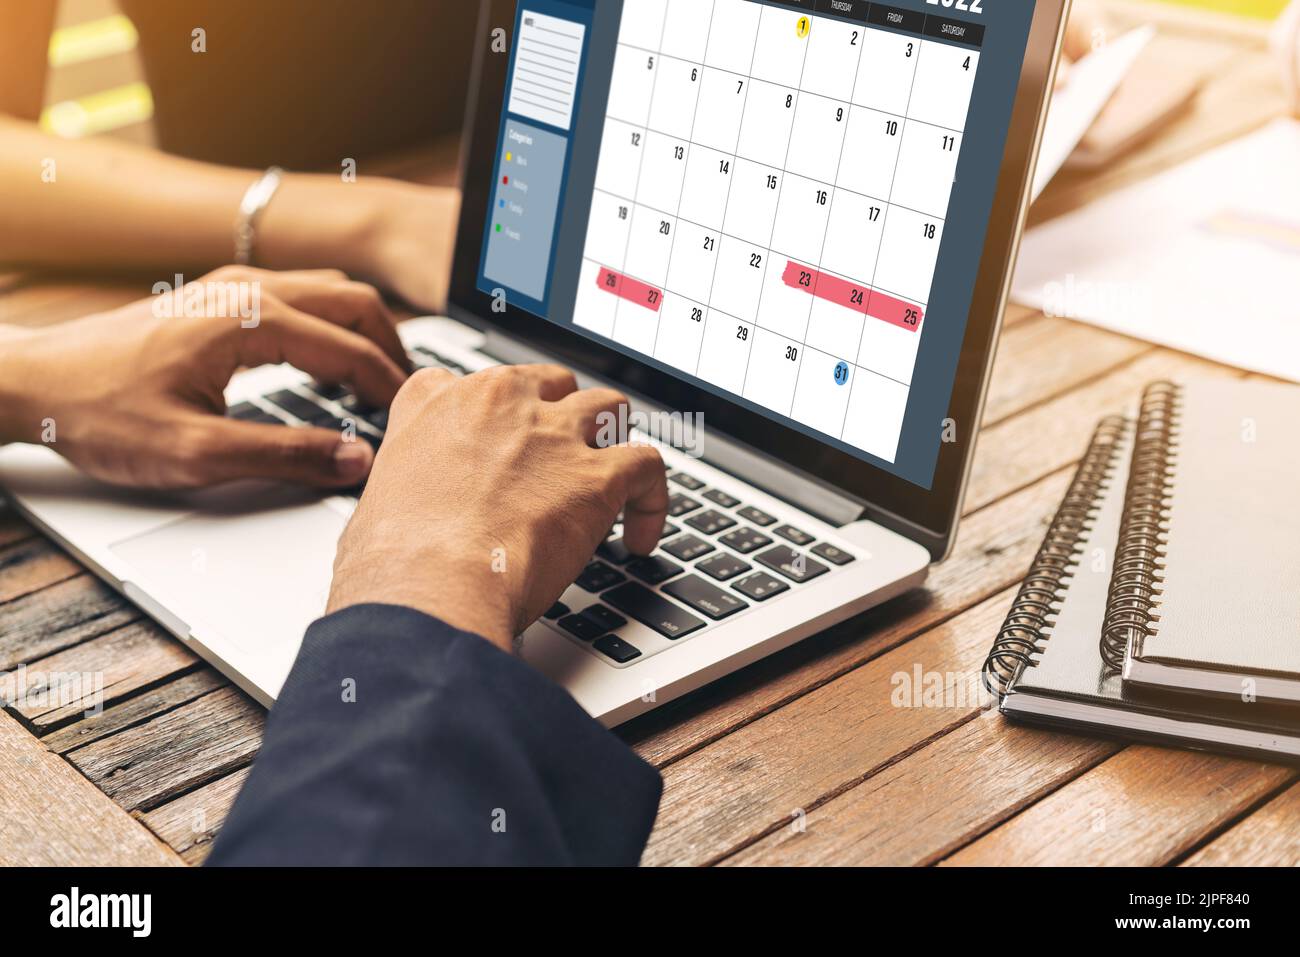 Calendar on computer software application for modish schedule planning for personal organizer and online business Stock Photo